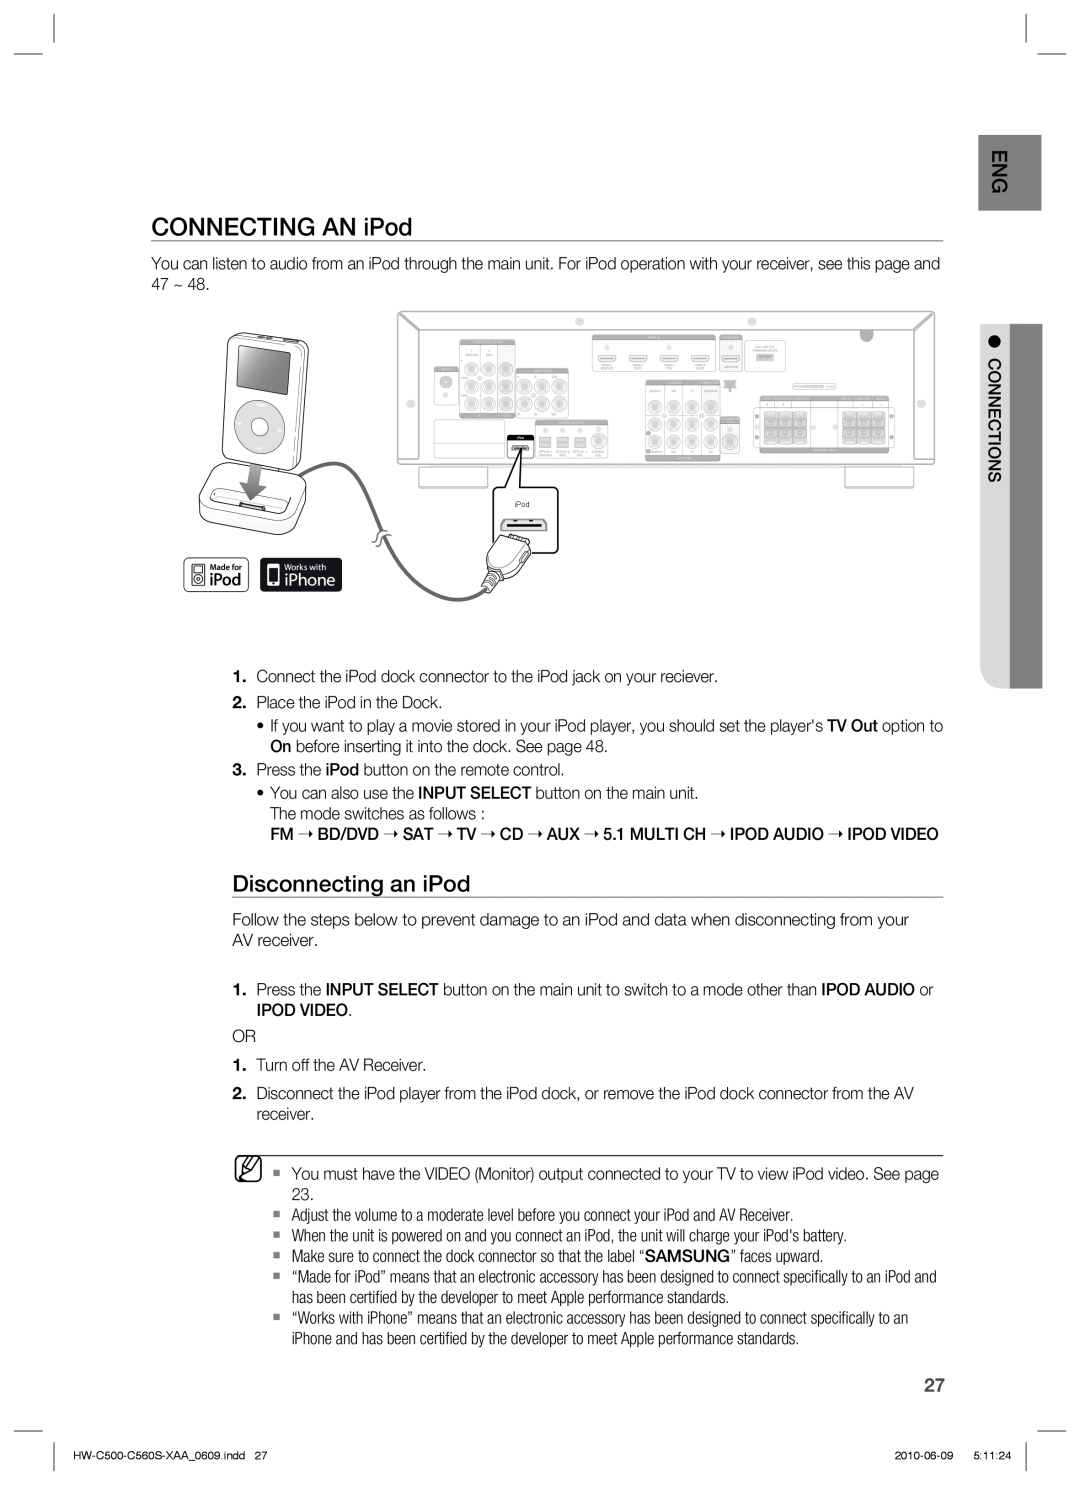 Samsung HW-C560S, HW-C500 user manual CONNECTING AN iPod, Disconnecting an iPod 